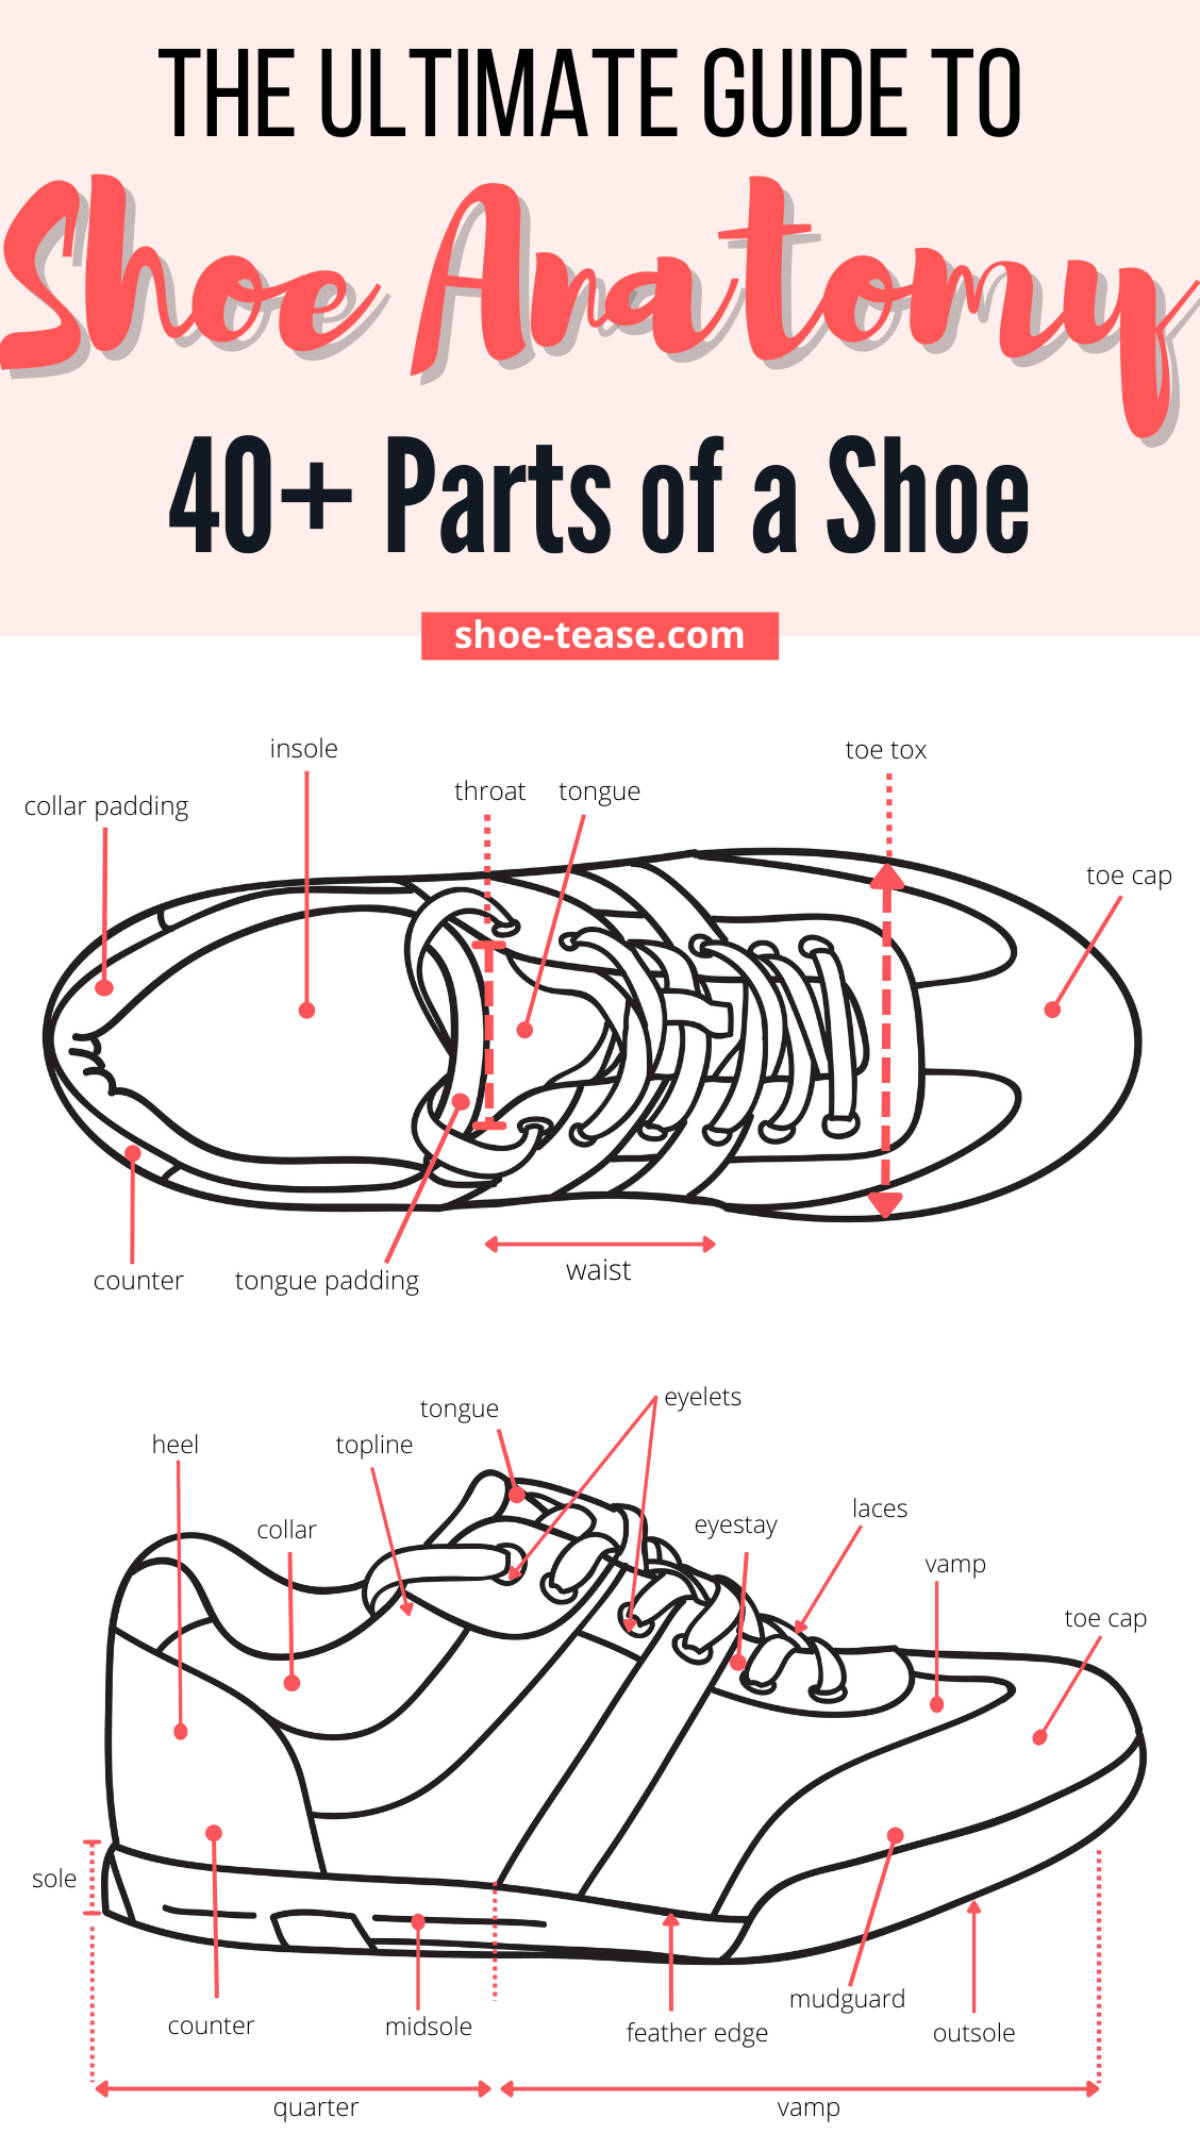 Text reading the ultimate guide to shoe anatomy 40 plus parts of a shoe over a top and side view line drawing of a shoe with various parts of the shoe indicated with pink arrows.